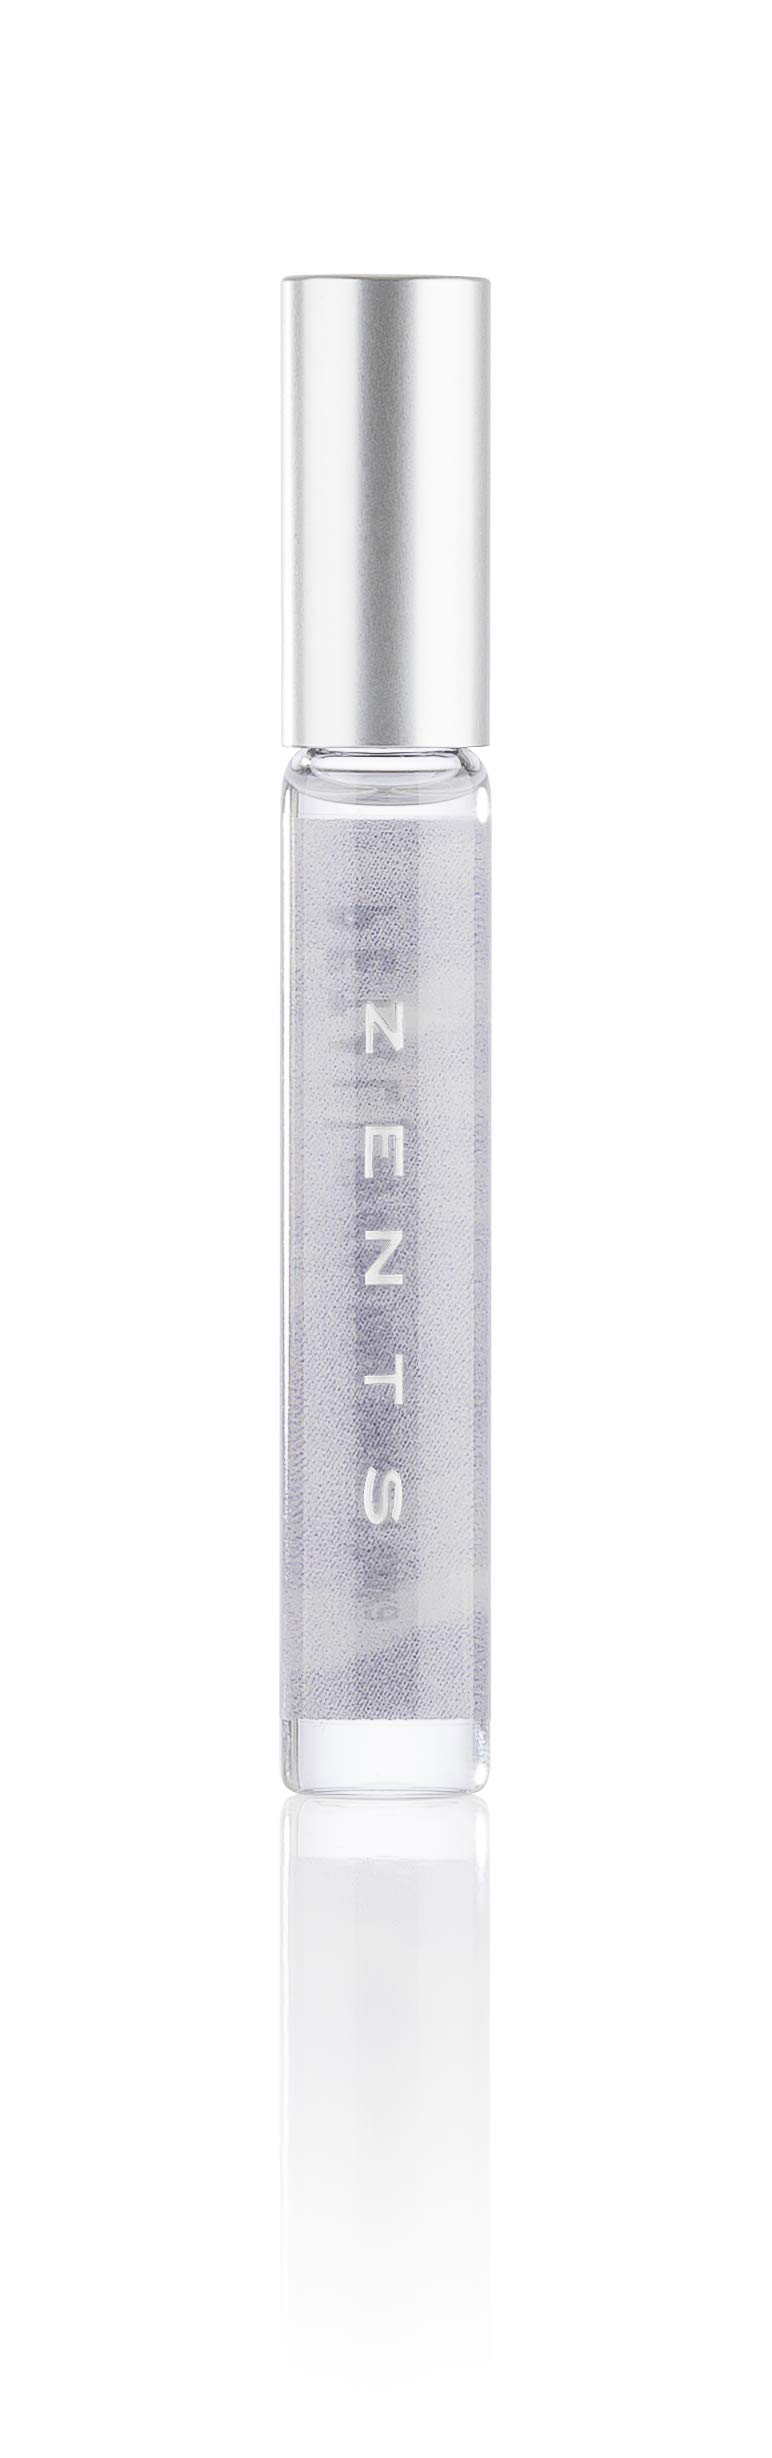 Zents Attar Roll-On Perfume (Petal Fragrance) Clean Luxury Scents, Long-Lasting Aromatherapy for Travel, 33 oz